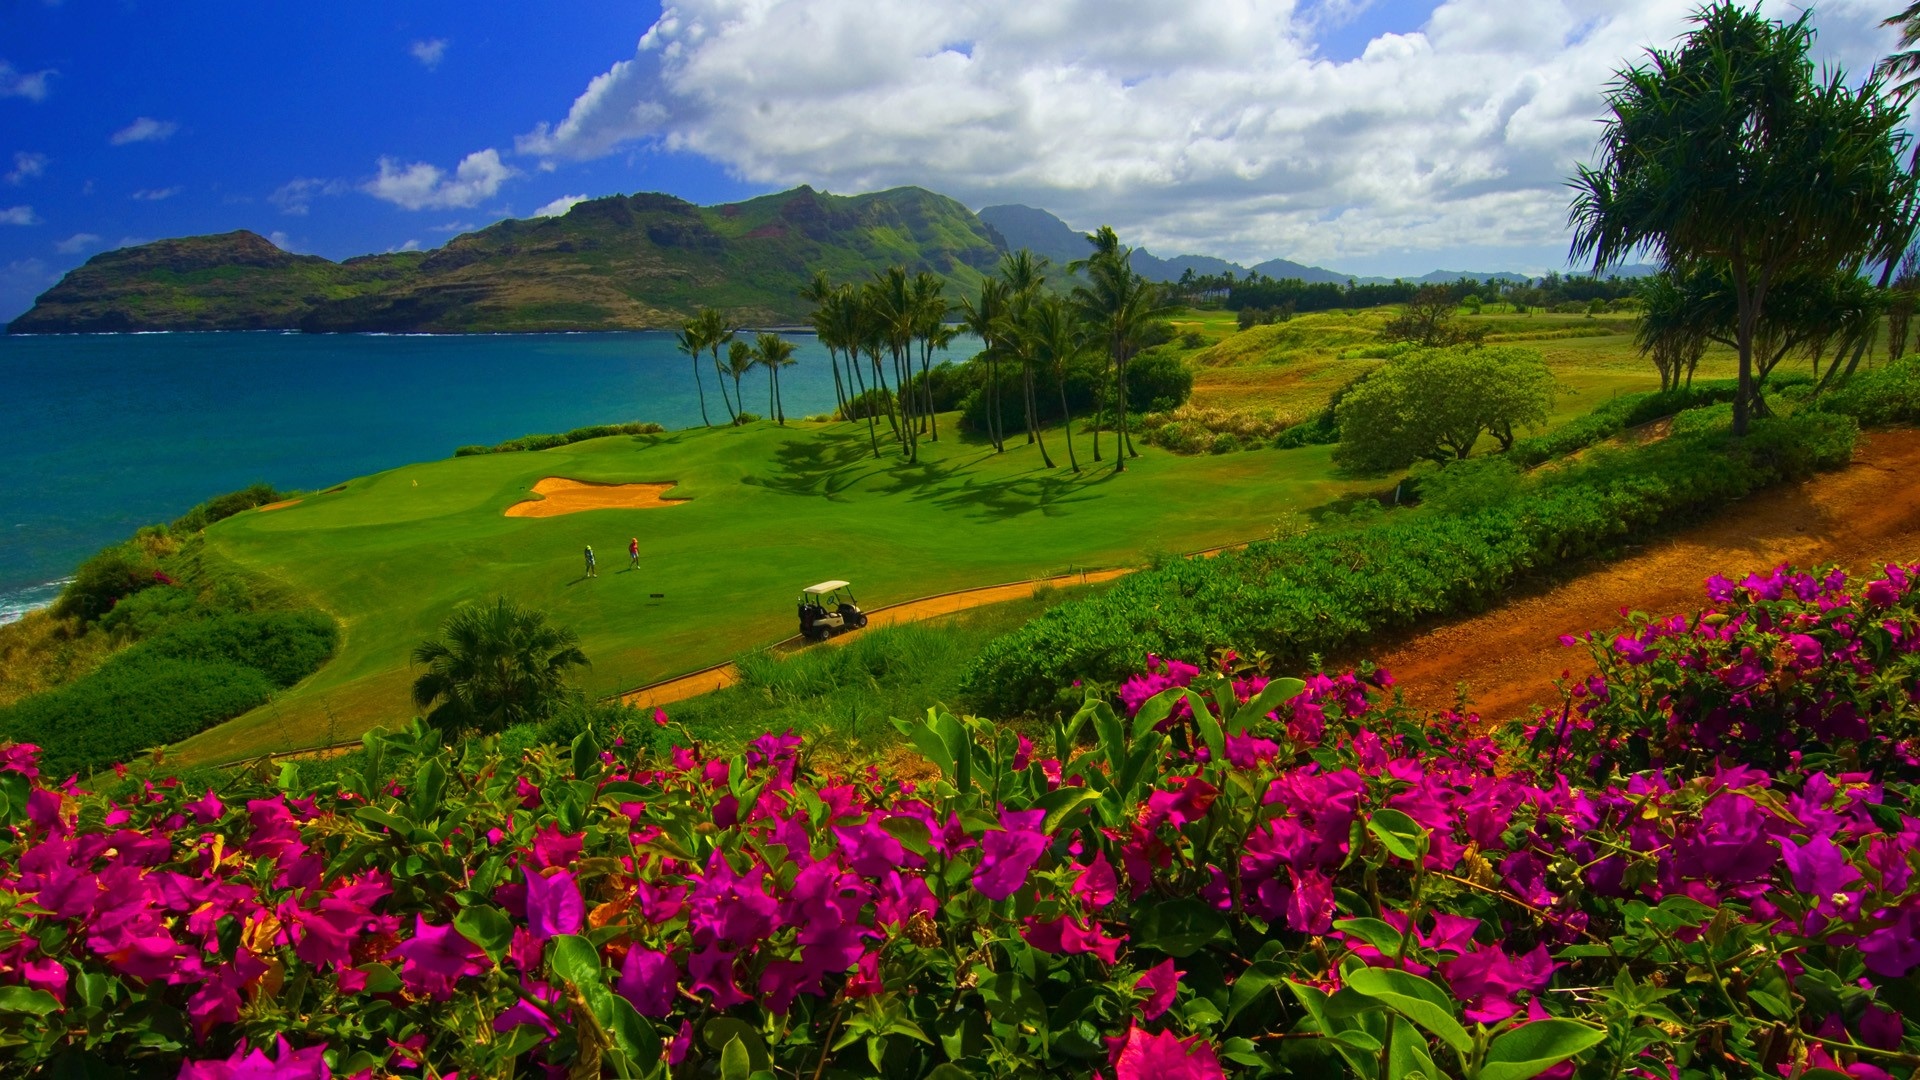 Golf Course: Landscape, Bay, Water, Nature, Shore, Flowers, Clouds, Coast, Palm trees, Ocean. 1920x1080 Full HD Wallpaper.